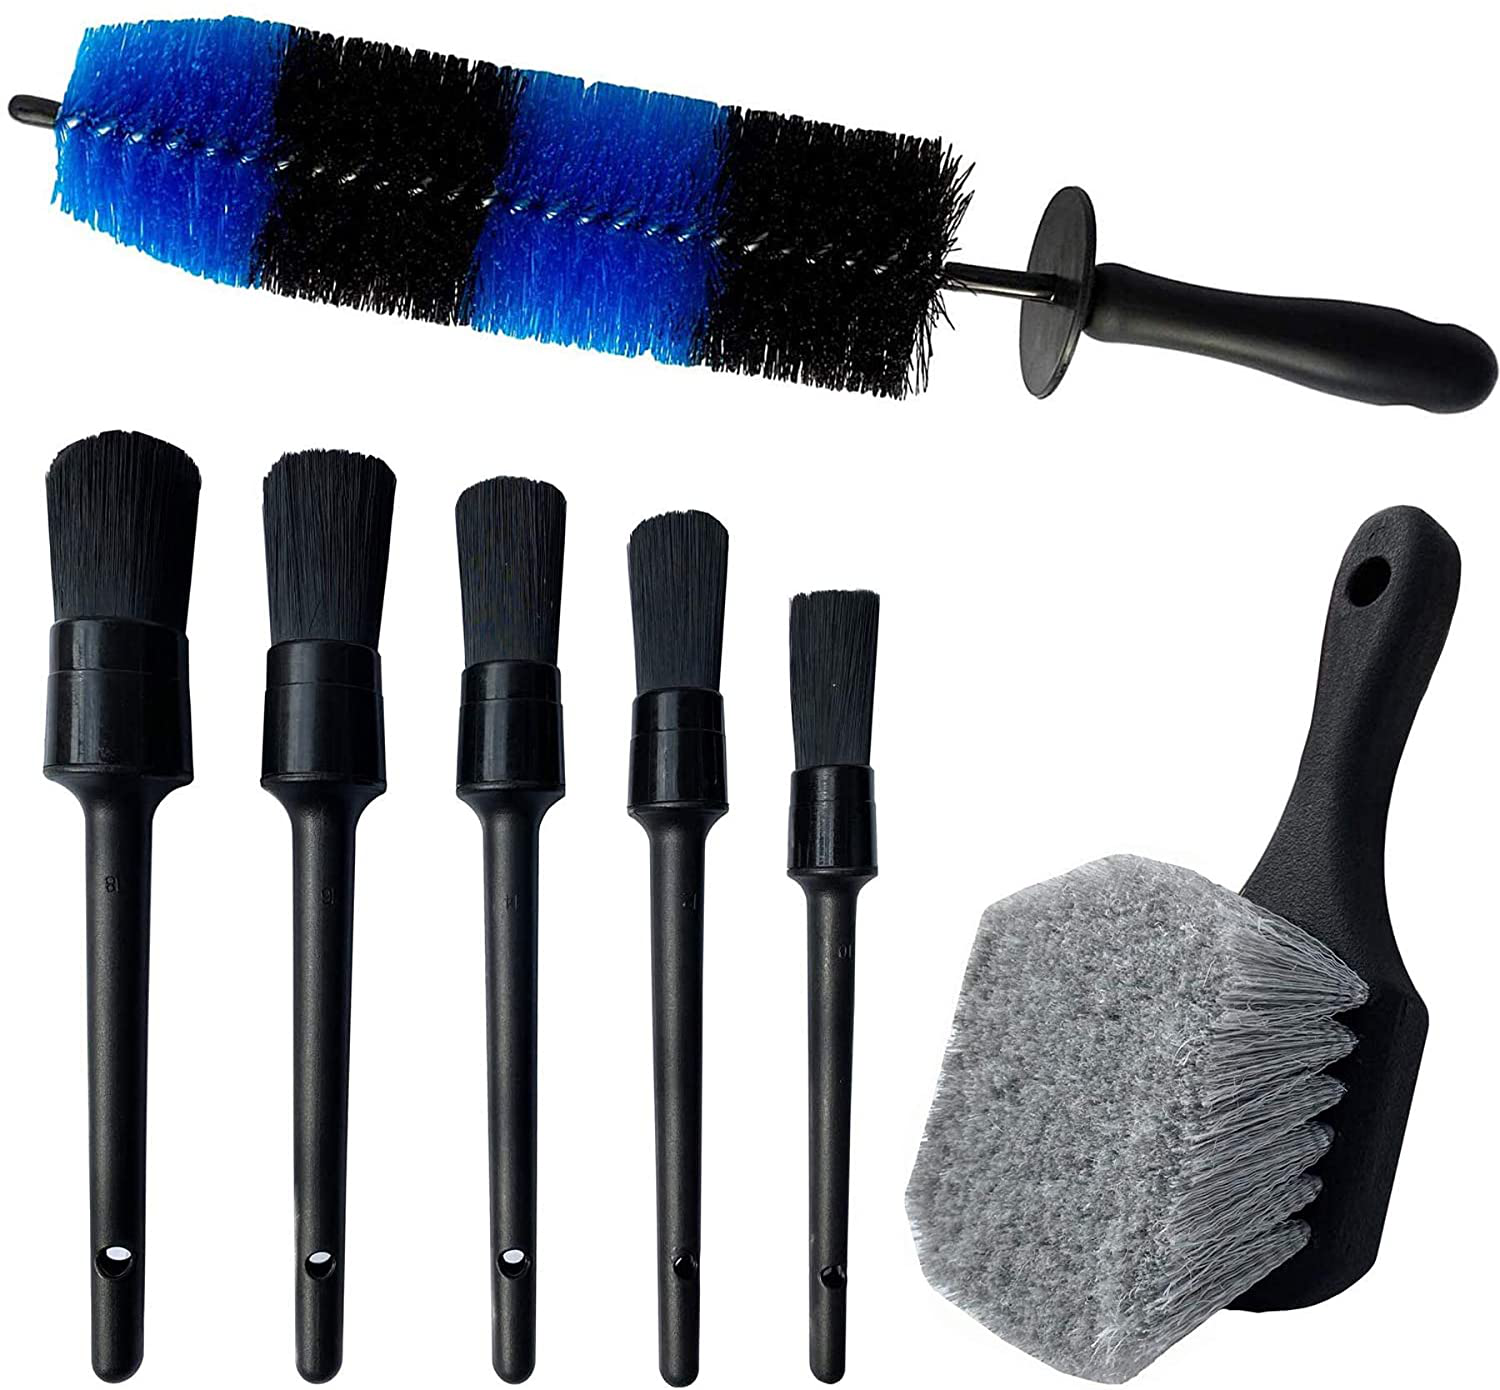 LUCKLYJONE 7Pcs Wheel & Tire Brush, car Detailing kit, 17inch Long Soft Wheel Brush 5 car wash Detail Brush car wash kit for Cleans Dirty Tires & Releases Dirt and Road Grime, Short Handle